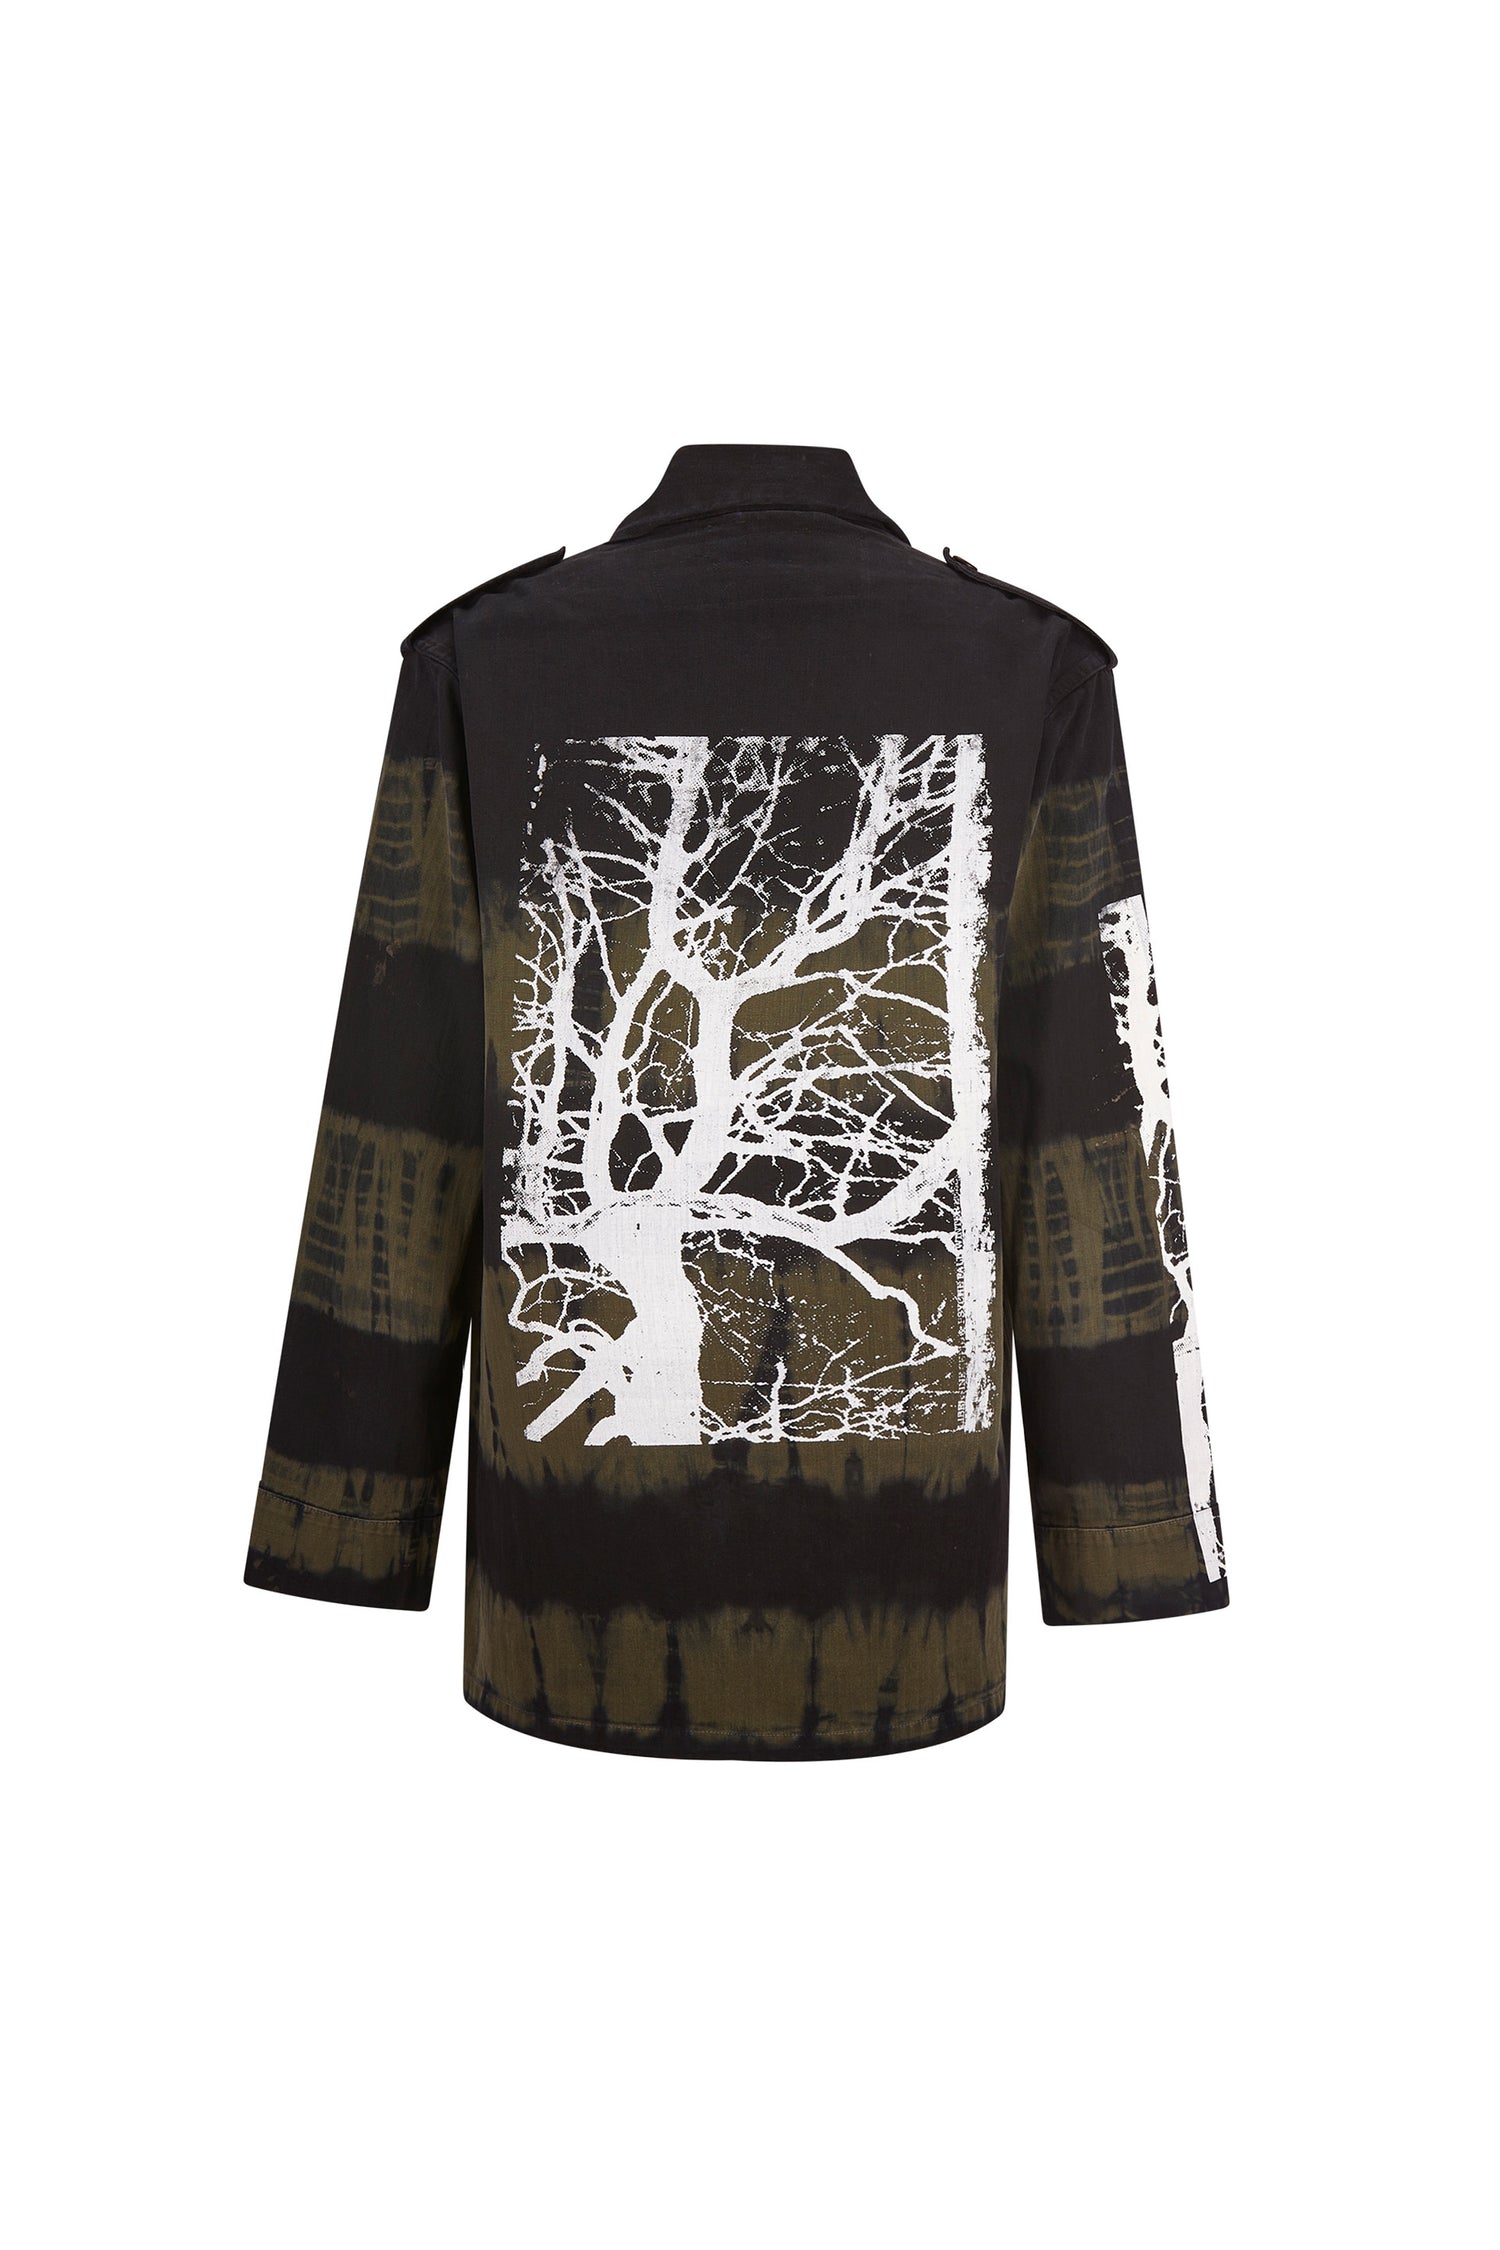 'MIDNIGHT FOREST' TIE DYE VINTAGE FRENCH MILITARY JACKET -  - Libertine